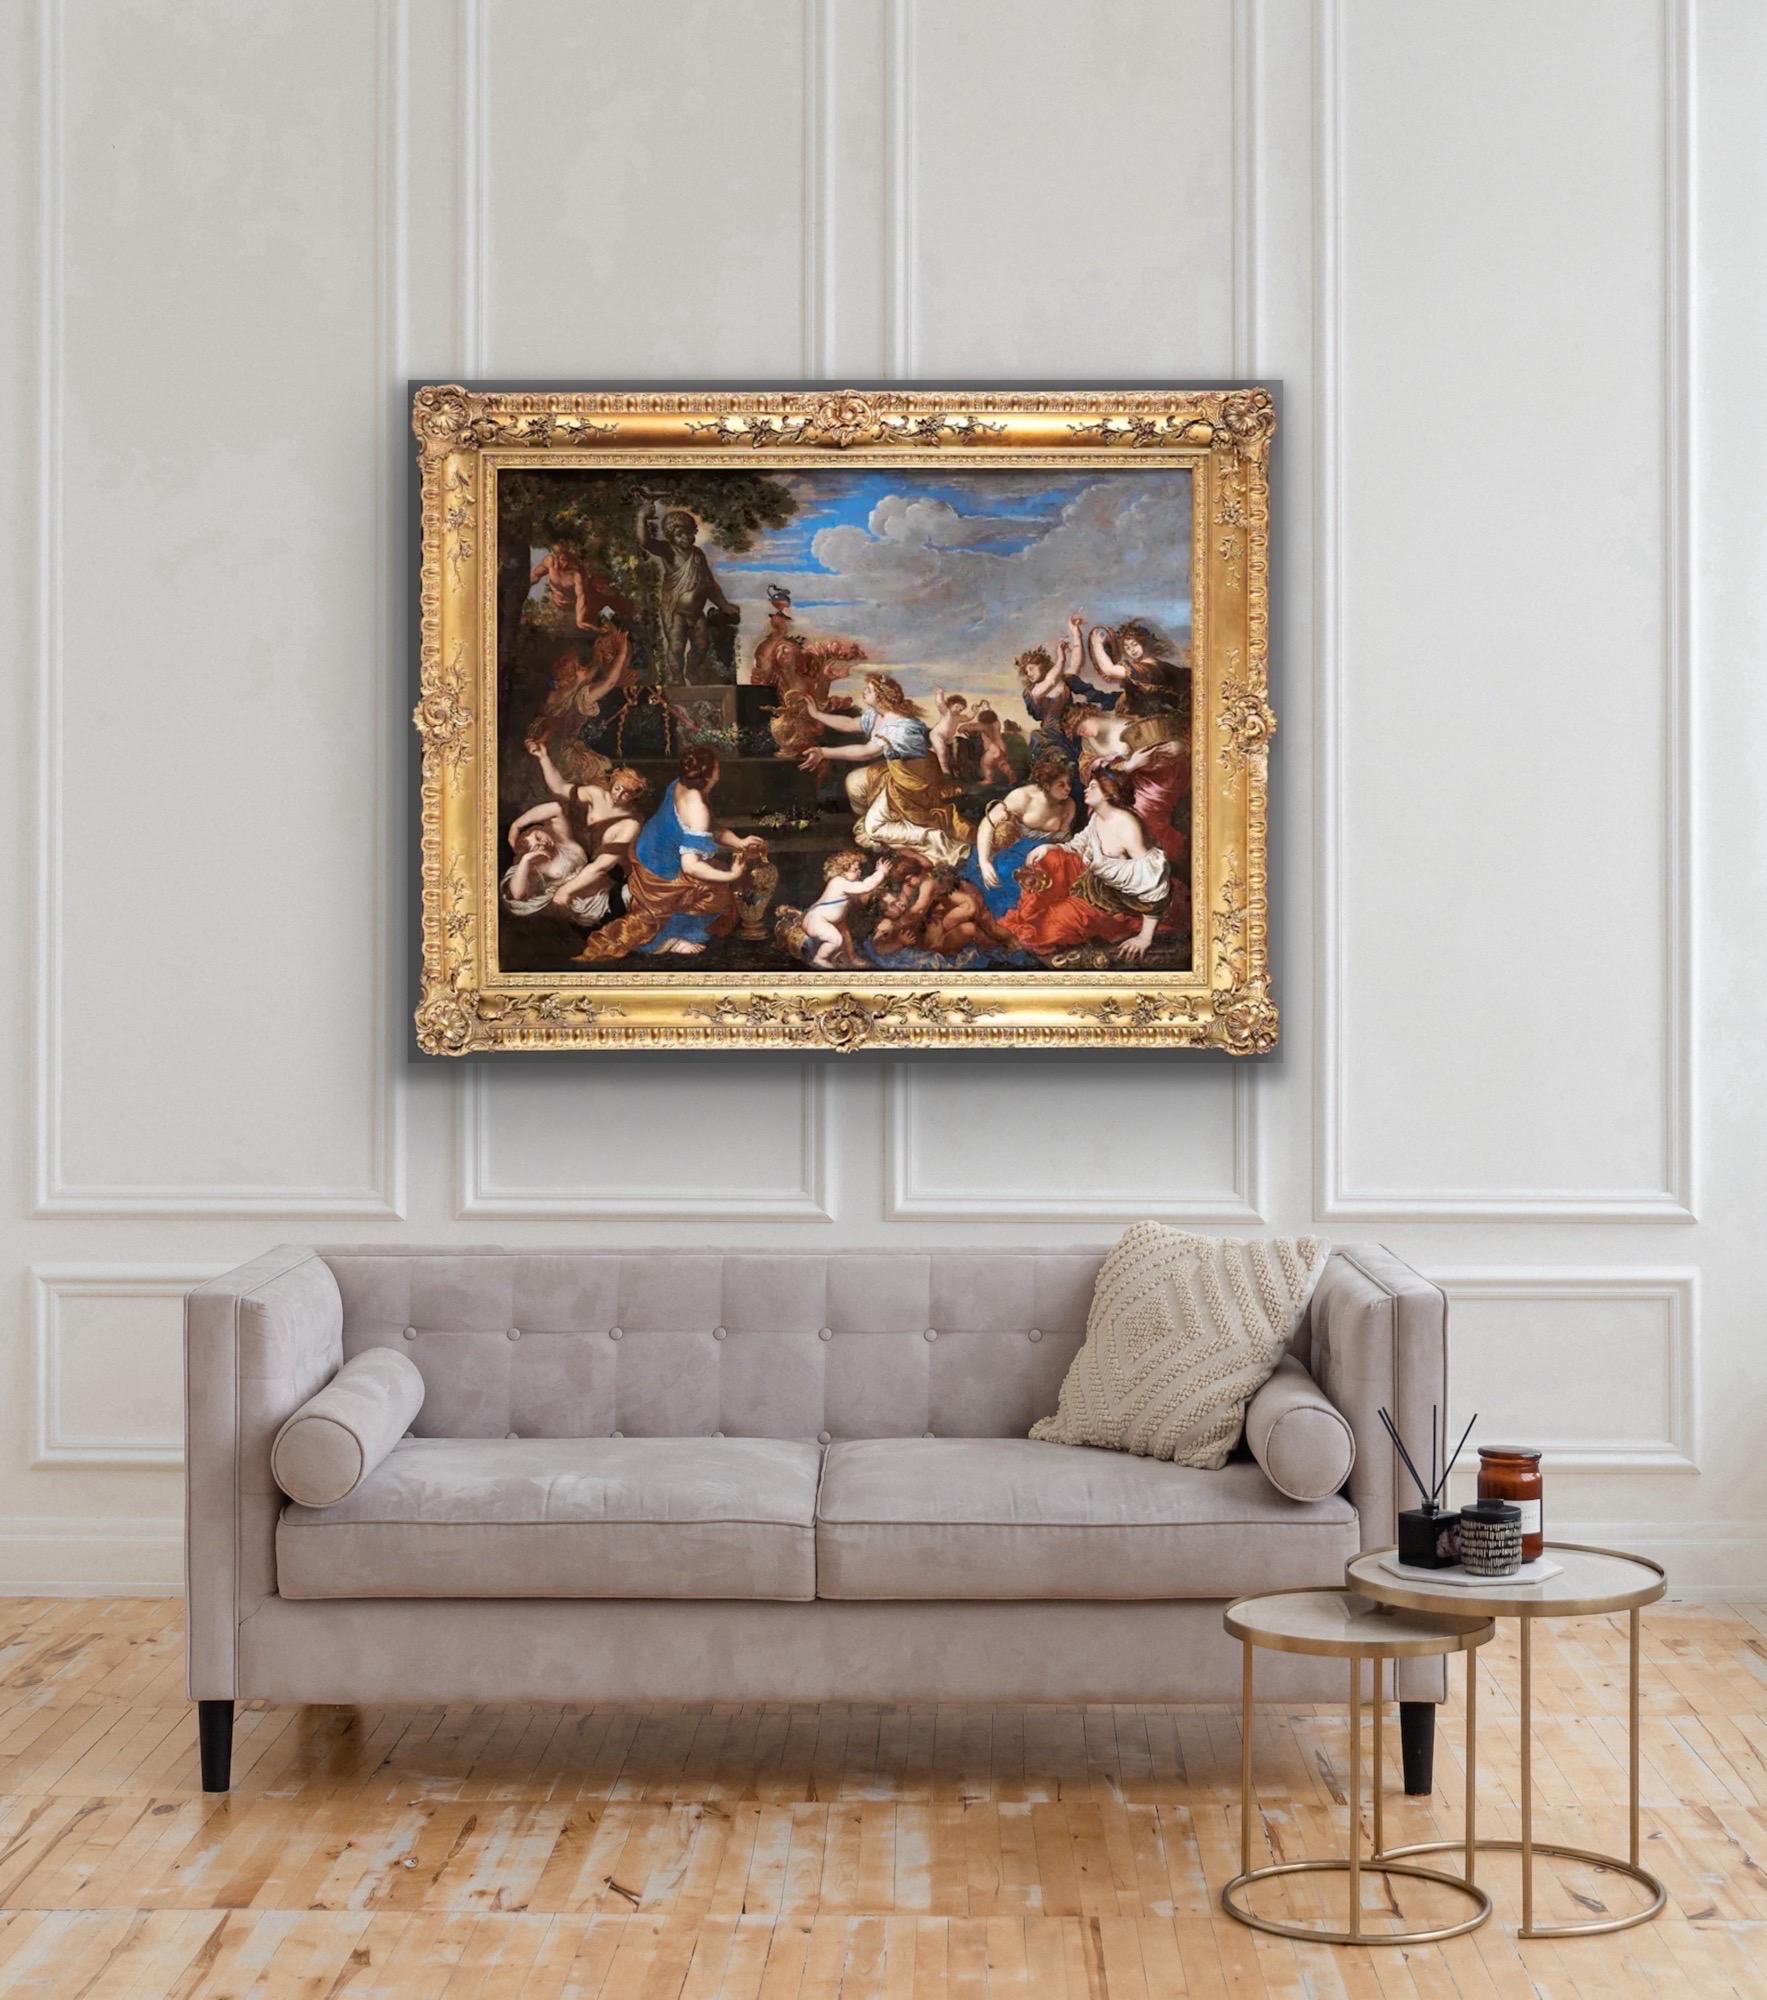 Huge 17th century old master - The feast of Bacchus - celebration Poussin 1